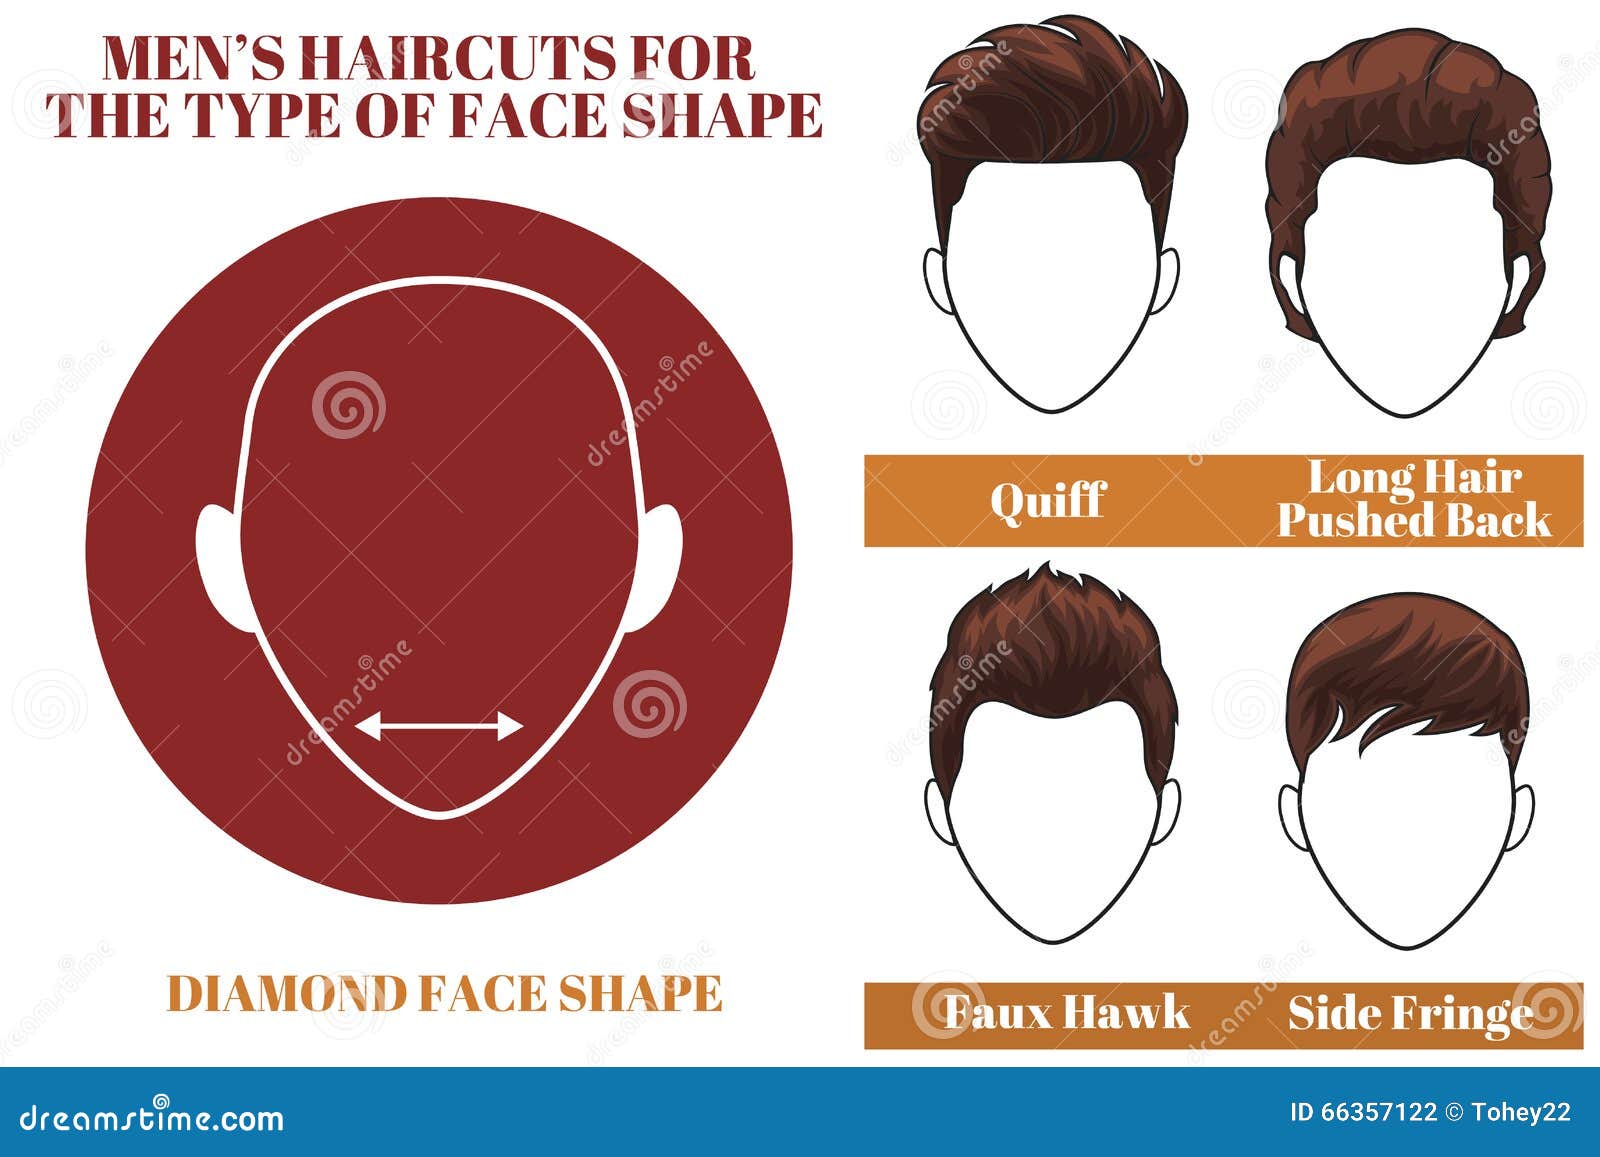 Triangle Face Shape Hairstyles For Men 2021 Choosing The Best Hairstyle for  Your Face Shape For Men  YouTube